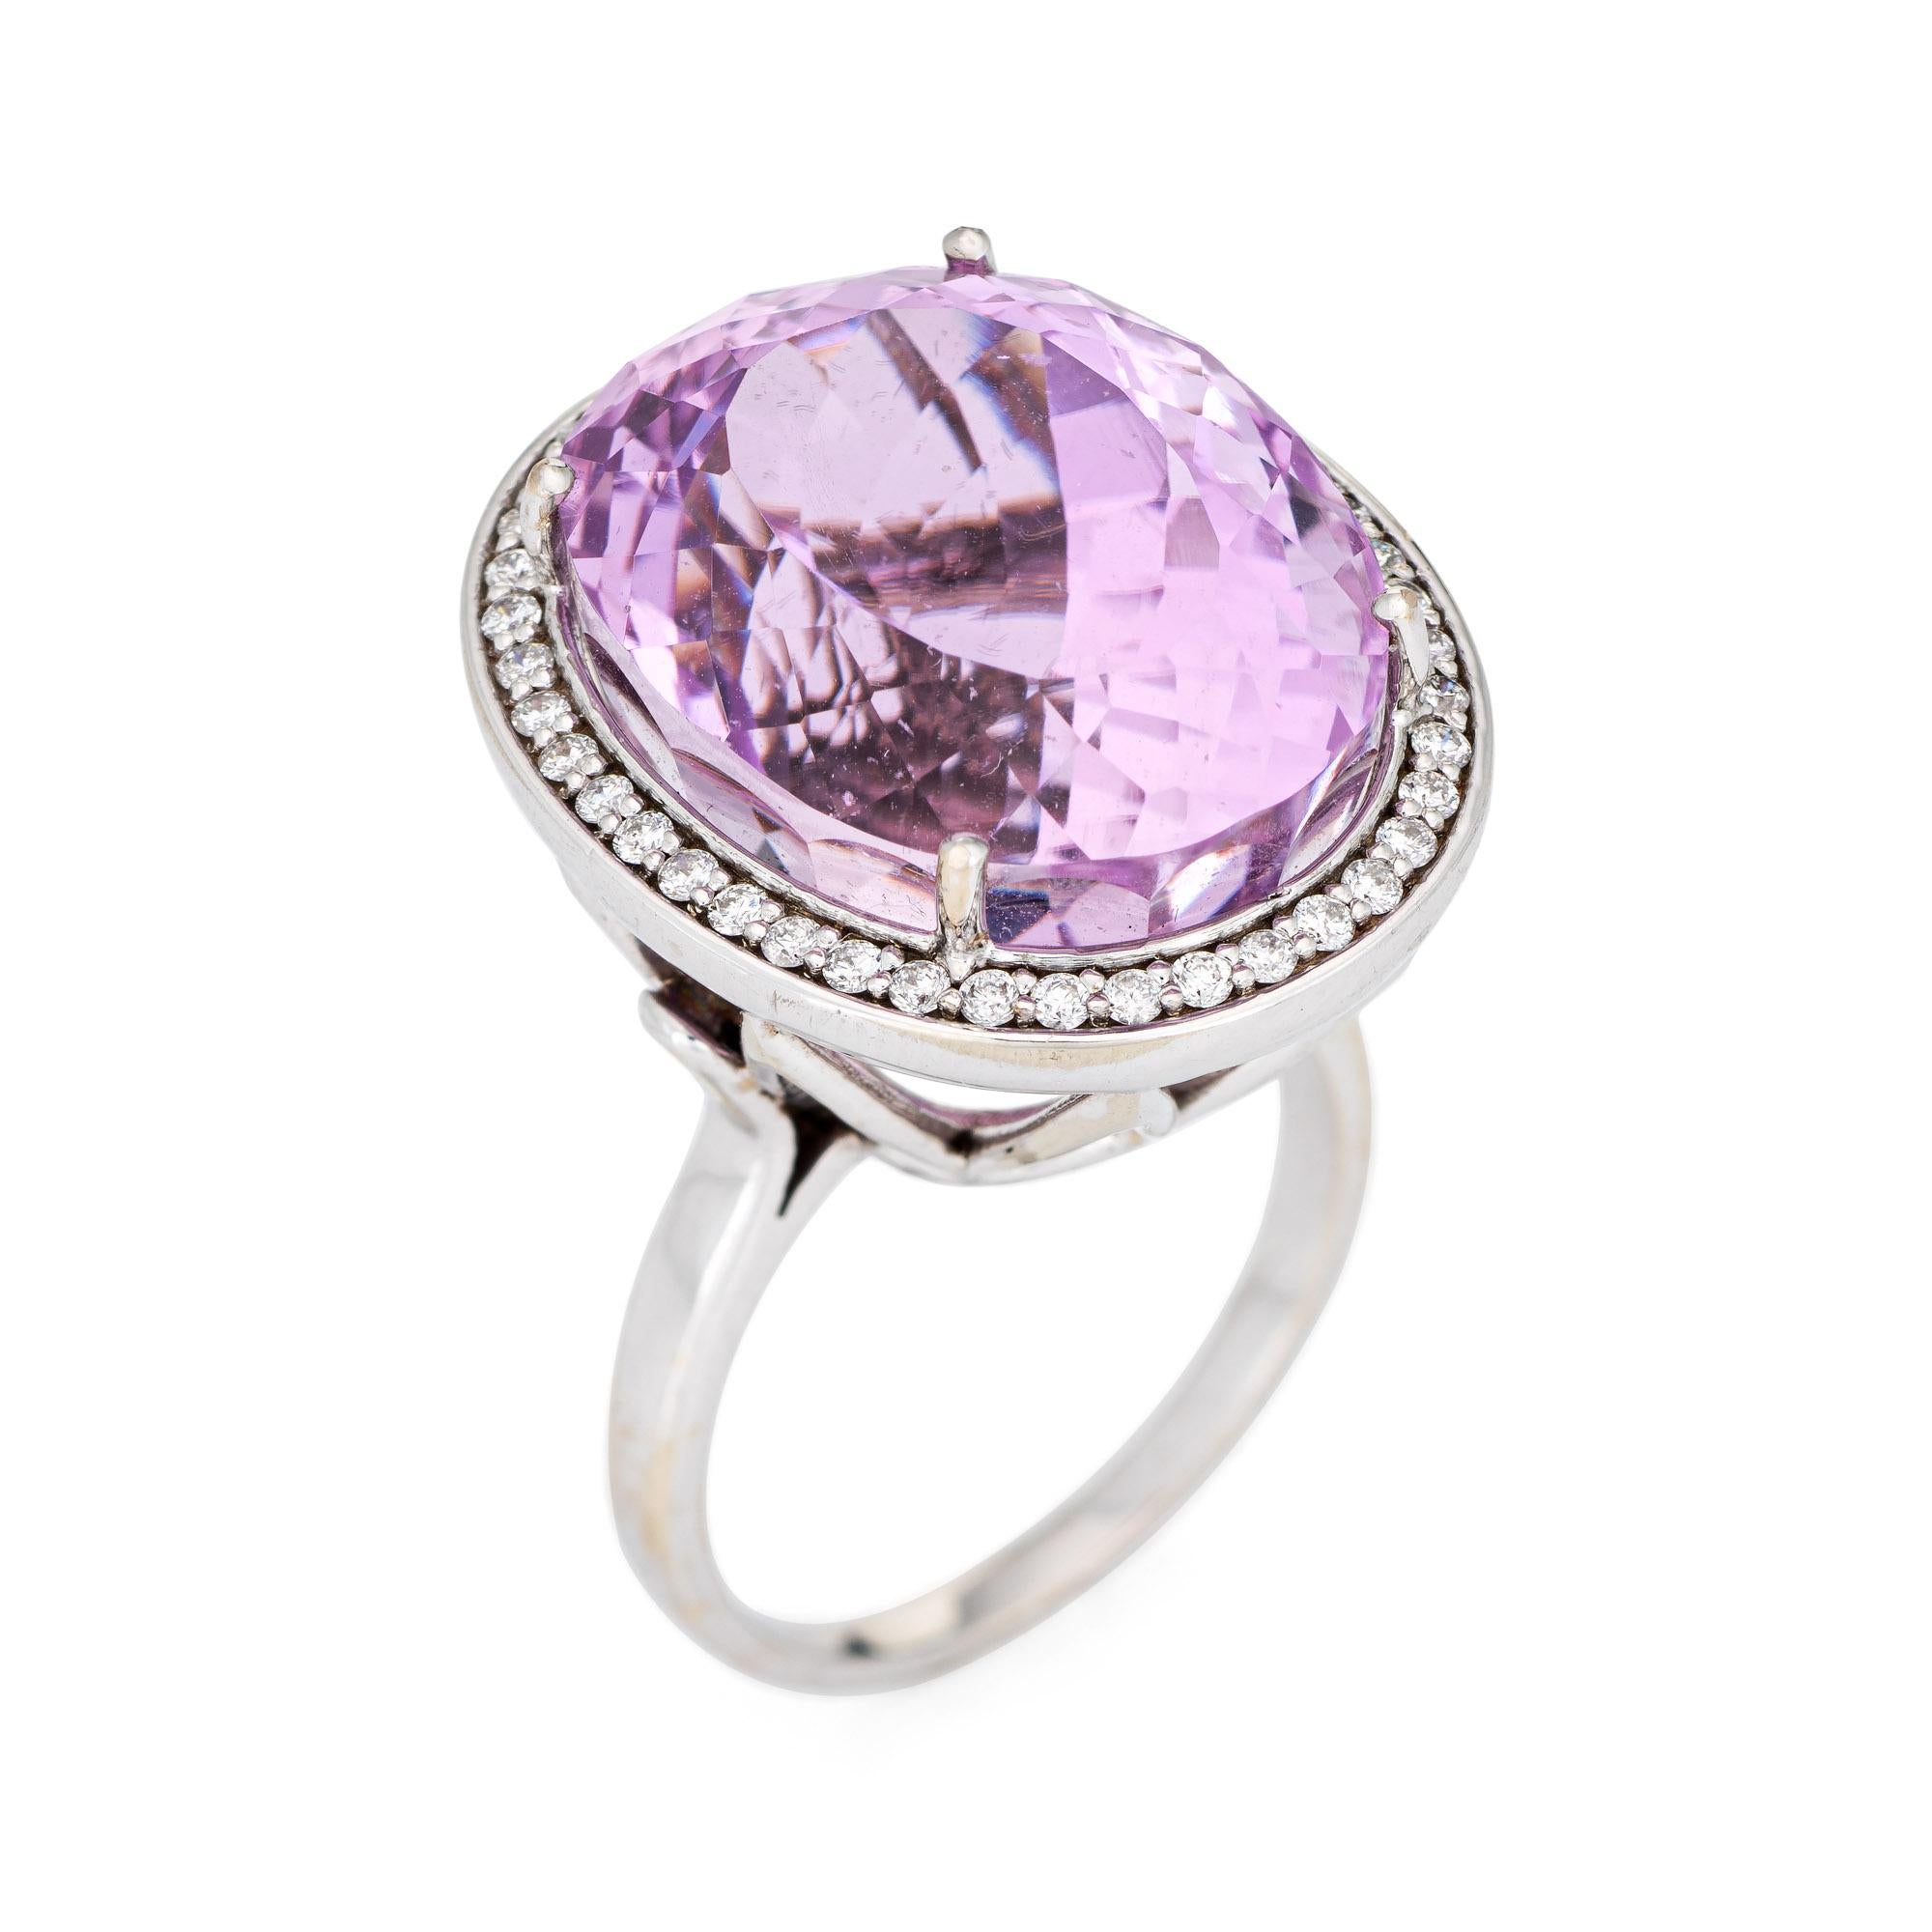 Stylish large estimated 20 carat kunzite & diamond cocktail ring (circa 2000s) crafted in 14 karat white gold. 

Oval faceted kunzite measures 19mm x 15mm (estimated at 20 carats), accented with an estimated 0.50 carats of diamonds (estimated at H-I